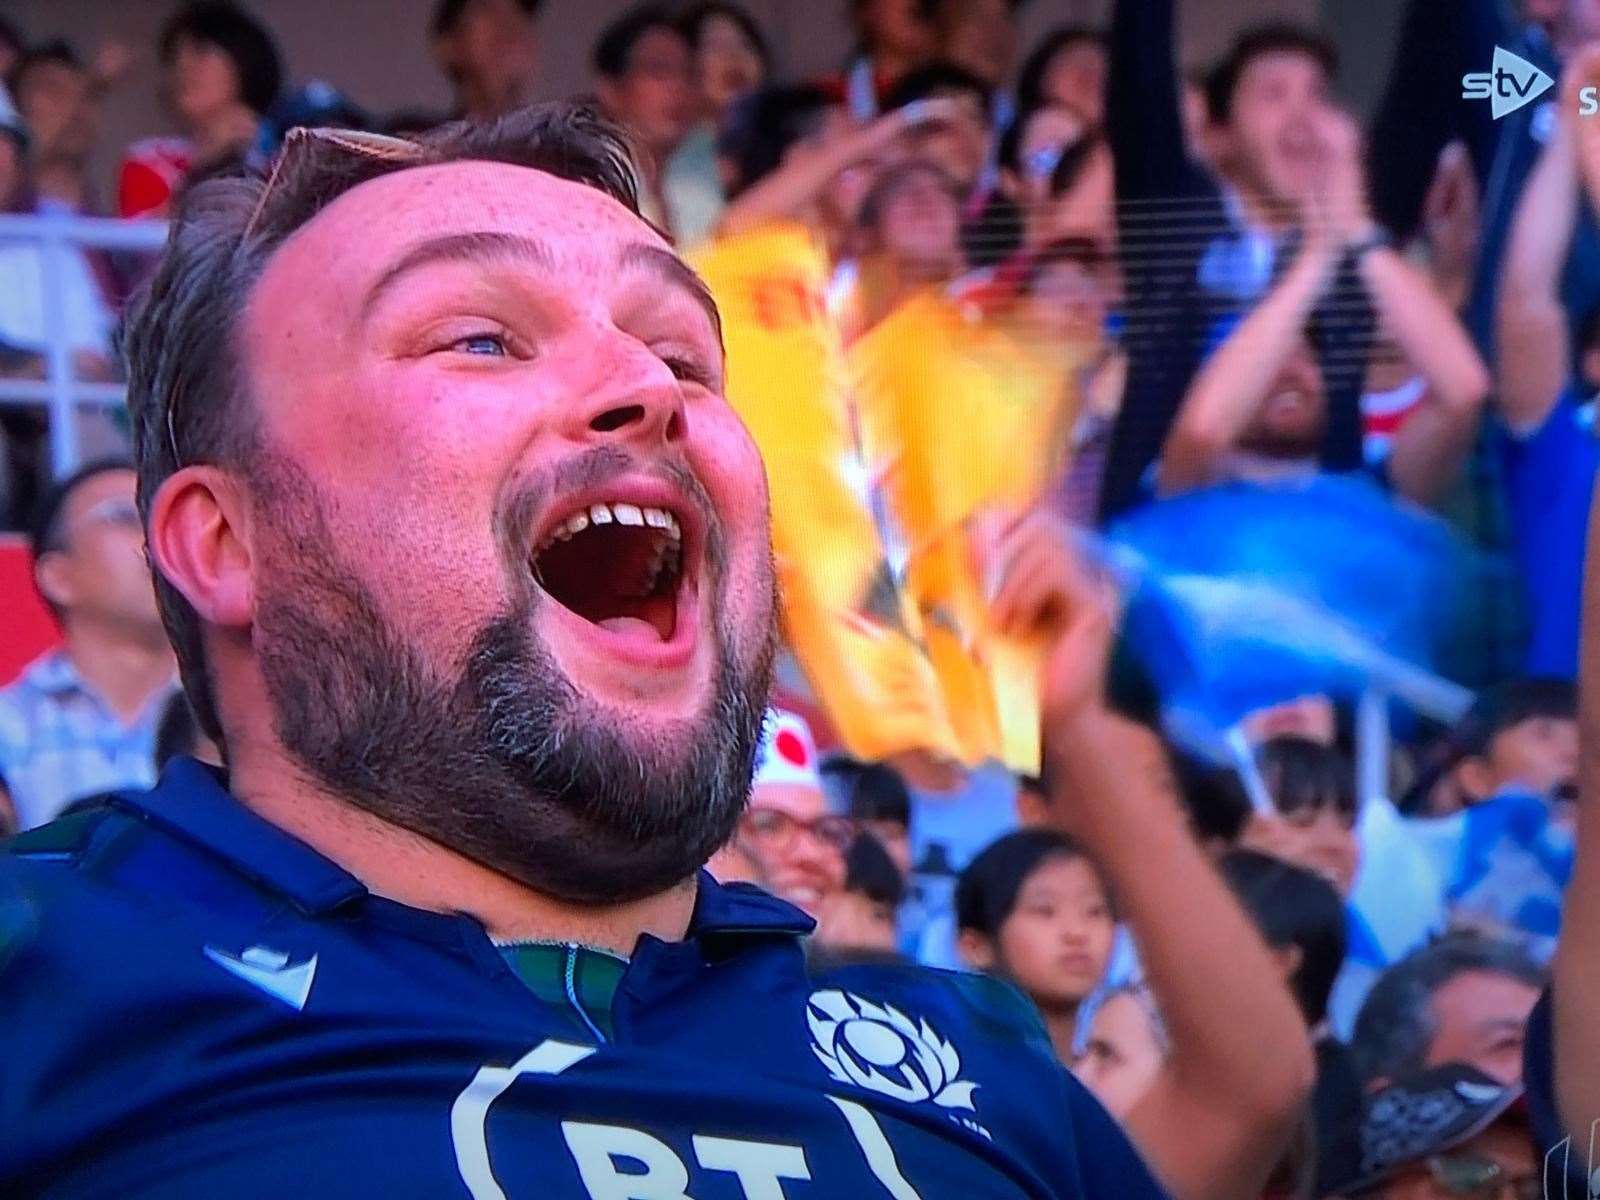 Come on Scotland! TV viewers saw Dale Coghill show his passionate support for the team.